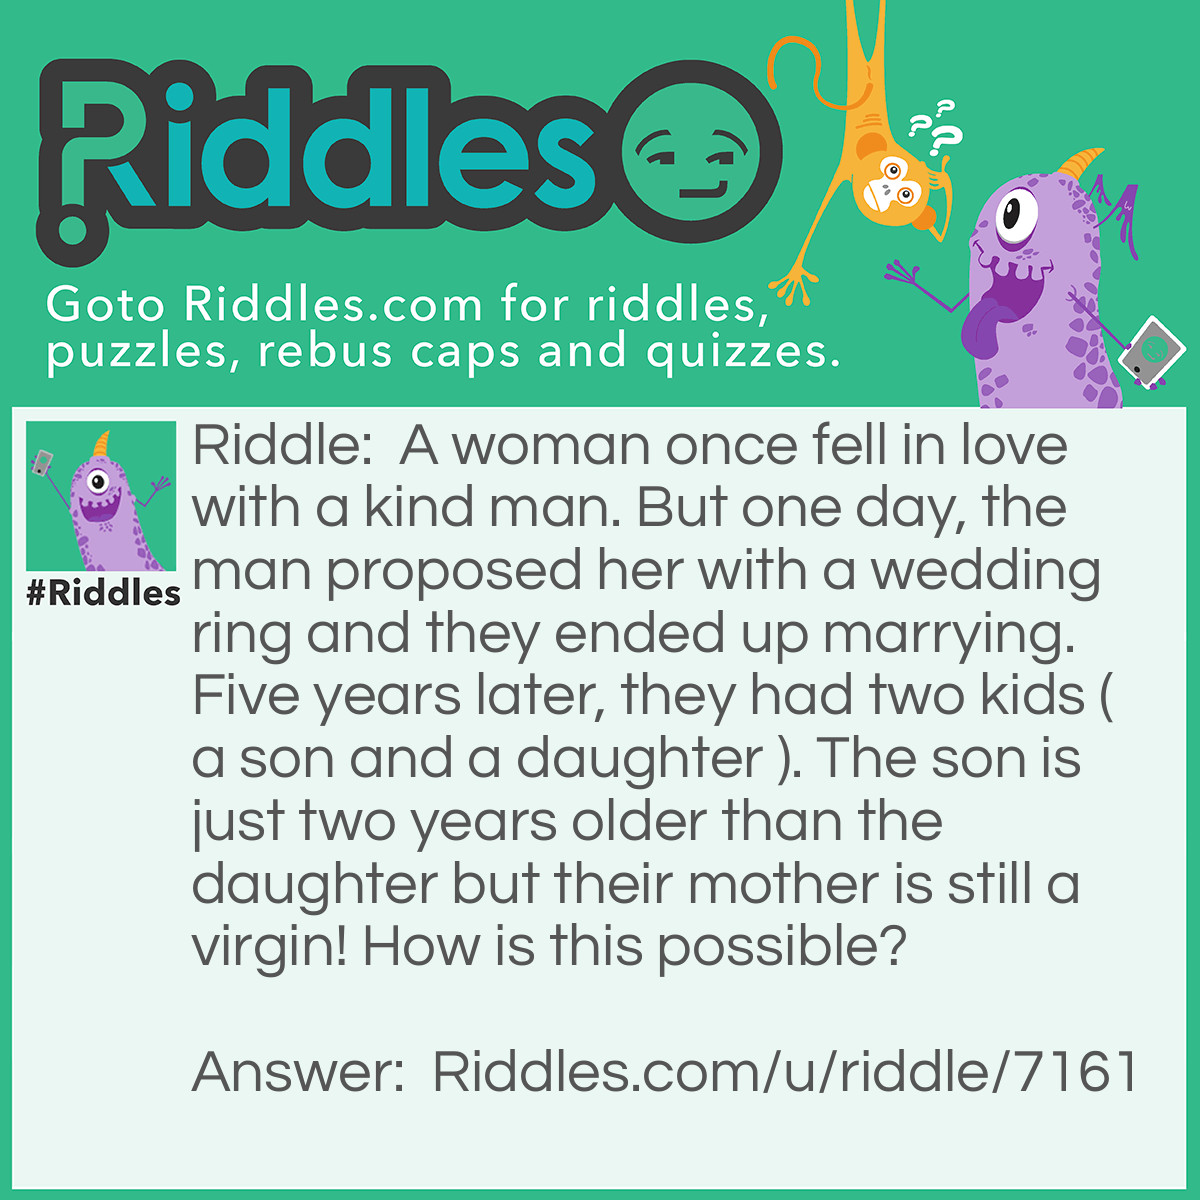 Riddle: A woman once fell in love with a kind man. But one day, the man proposed her with a wedding ring and they ended up marrying. <a href="/riddles-for-kids">Five years</a> later, they had two kids ( a son and a daughter ). The son is just two years older than the daughter but their mother is still a virgin! How is this possible? Answer: Because the kids were adopted. She is not a biological mother of those kids.